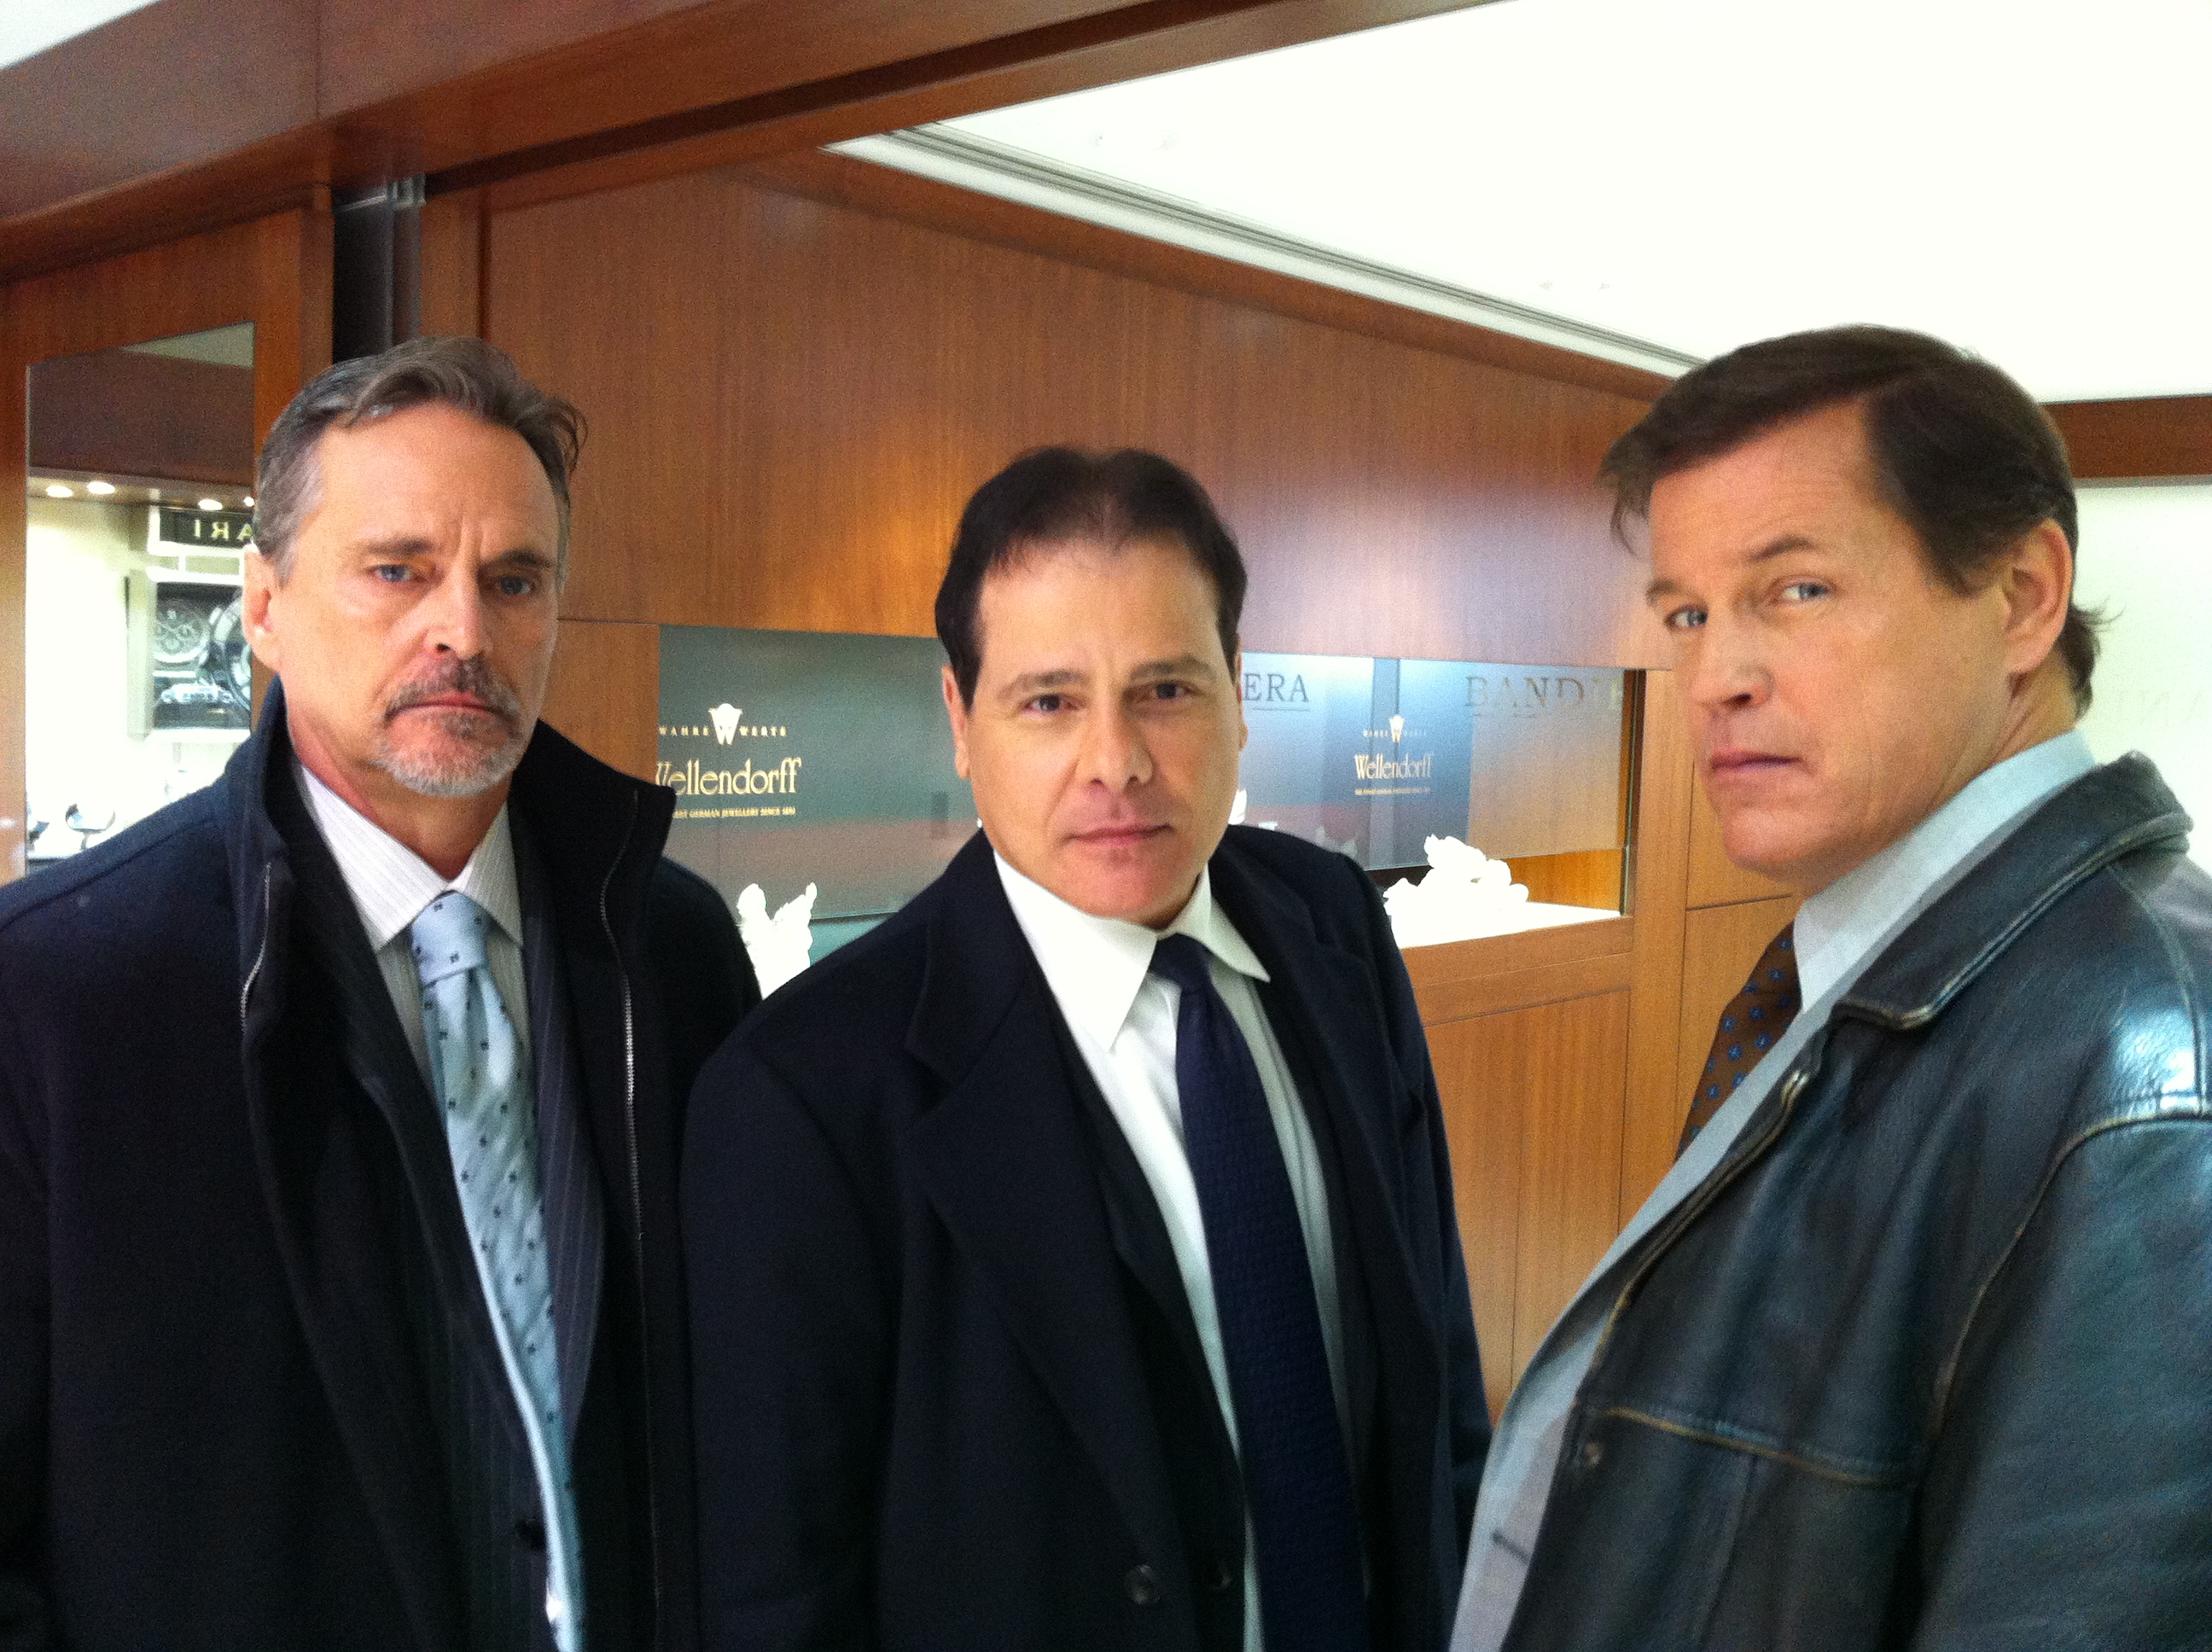 Robert Mangiardi, Frank D'Angelo and Michael Pare on the set of Real Gangsters.